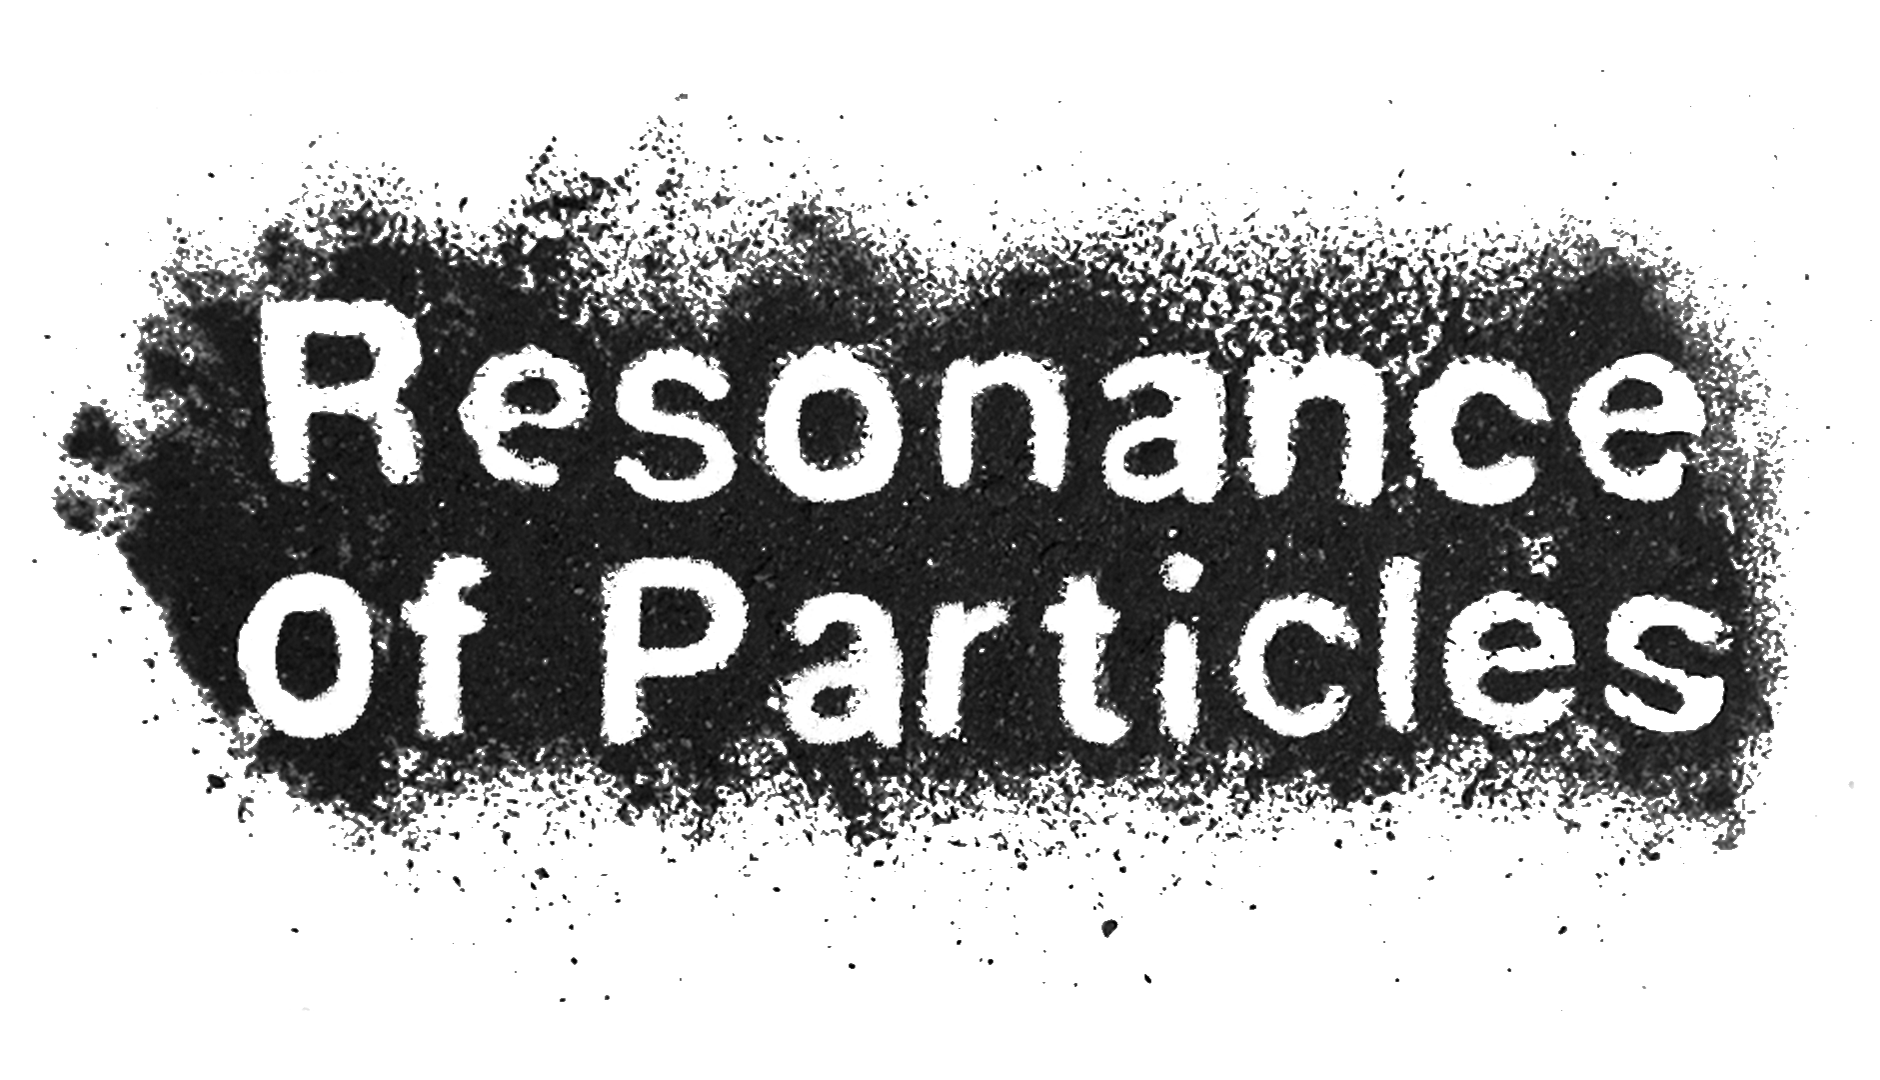 Resonance of Particles